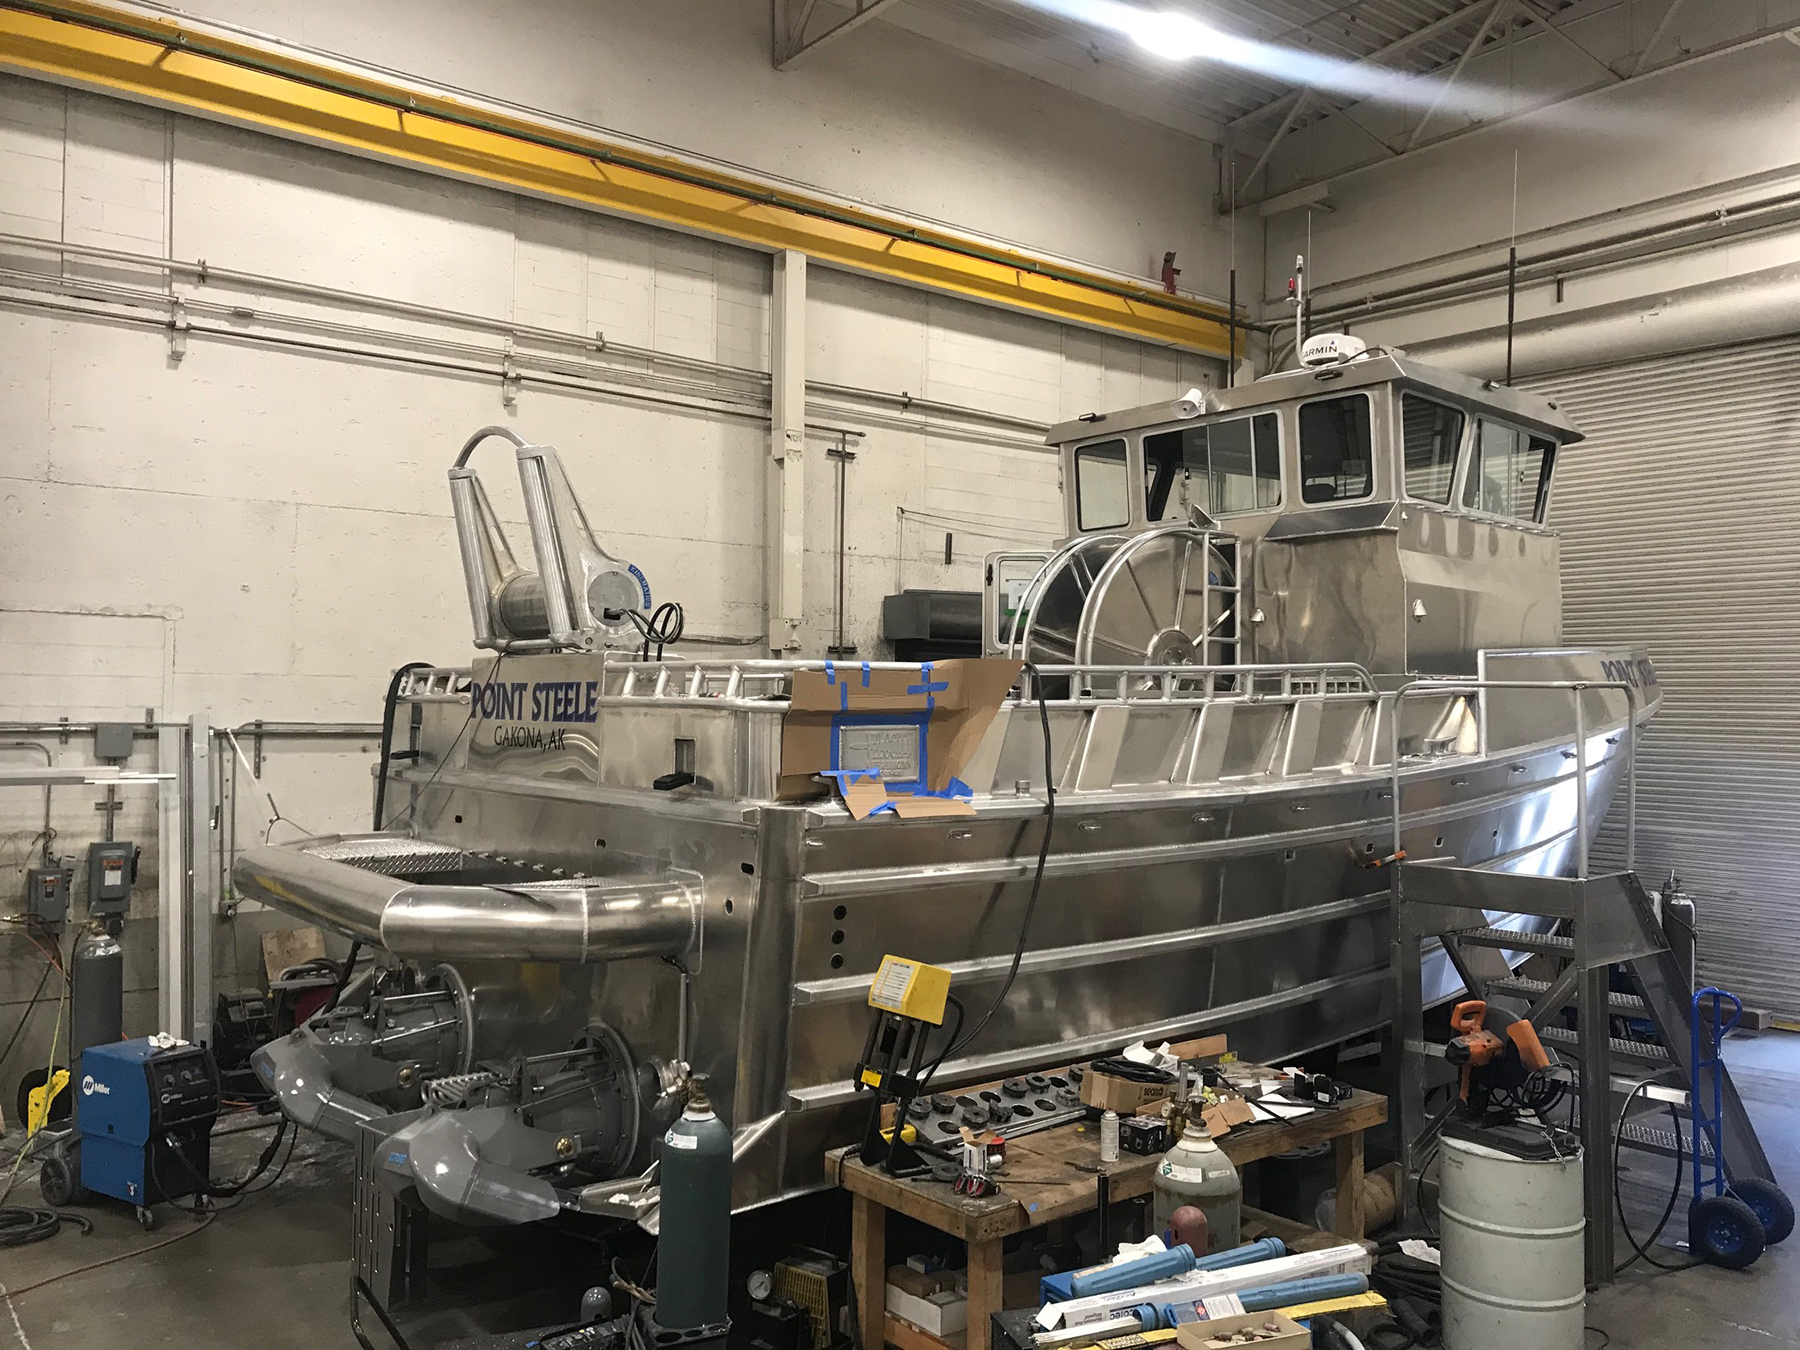 Point Steele getting the finishing touches in the Velocity Marine shop